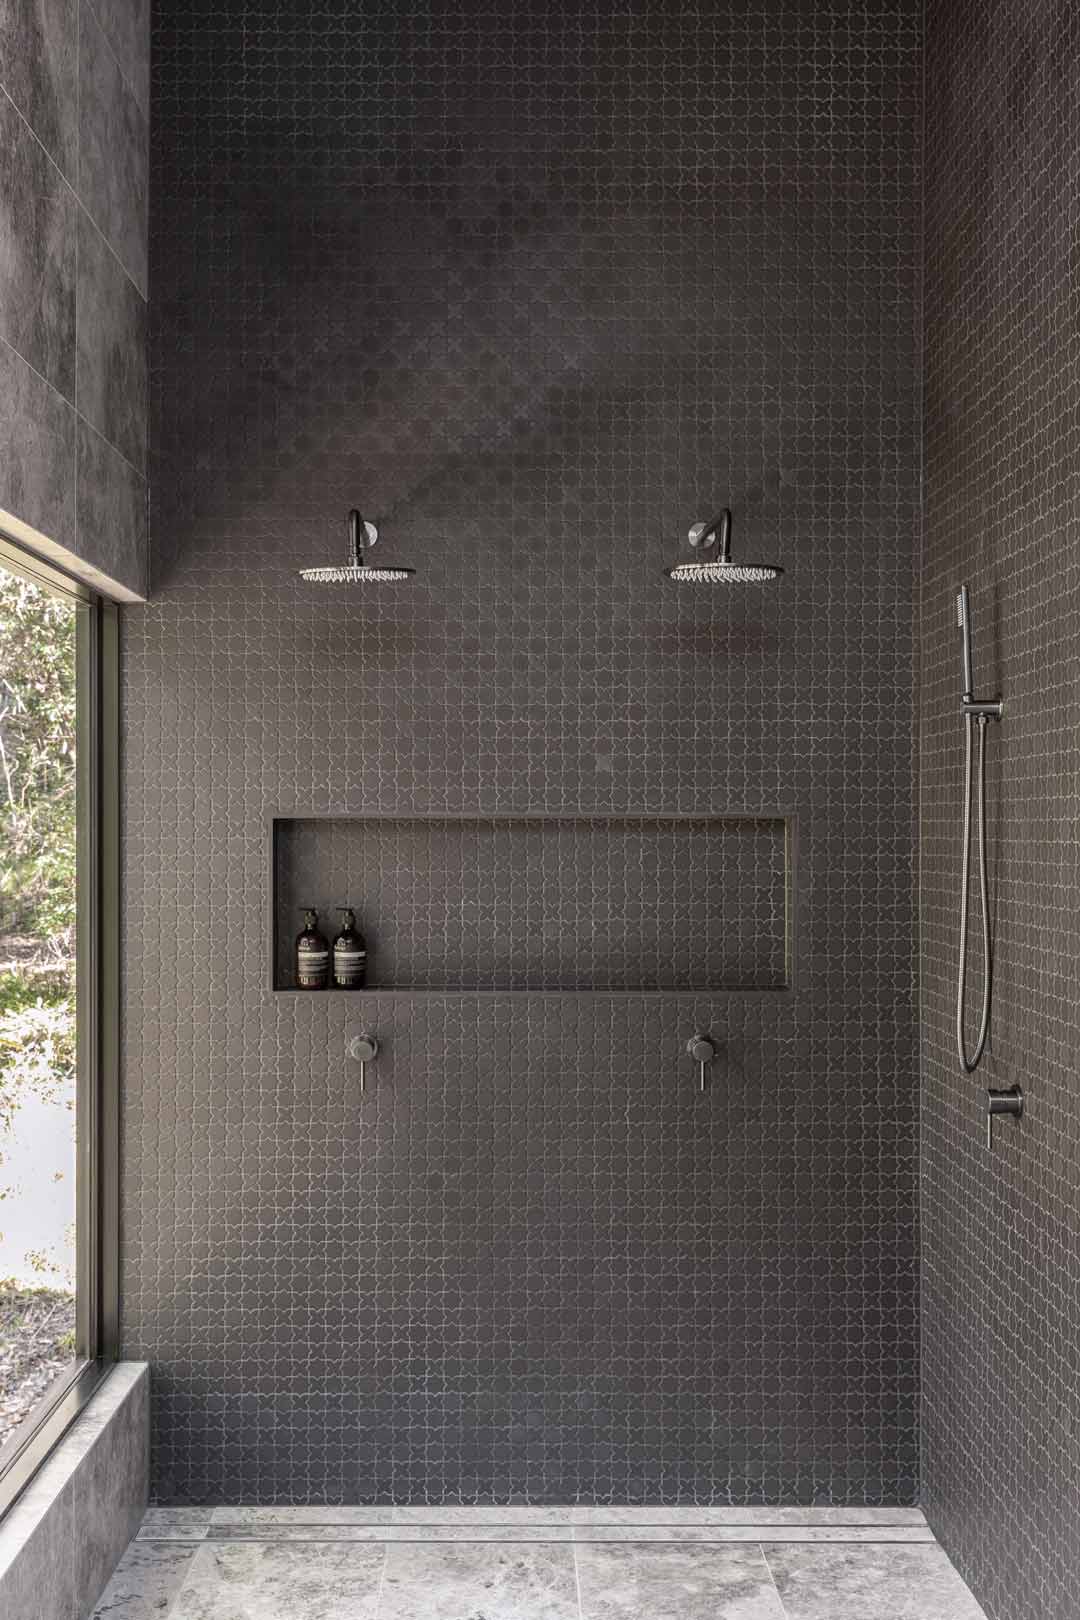 6 Shower Ideas for an Aesthetic Shower Routine